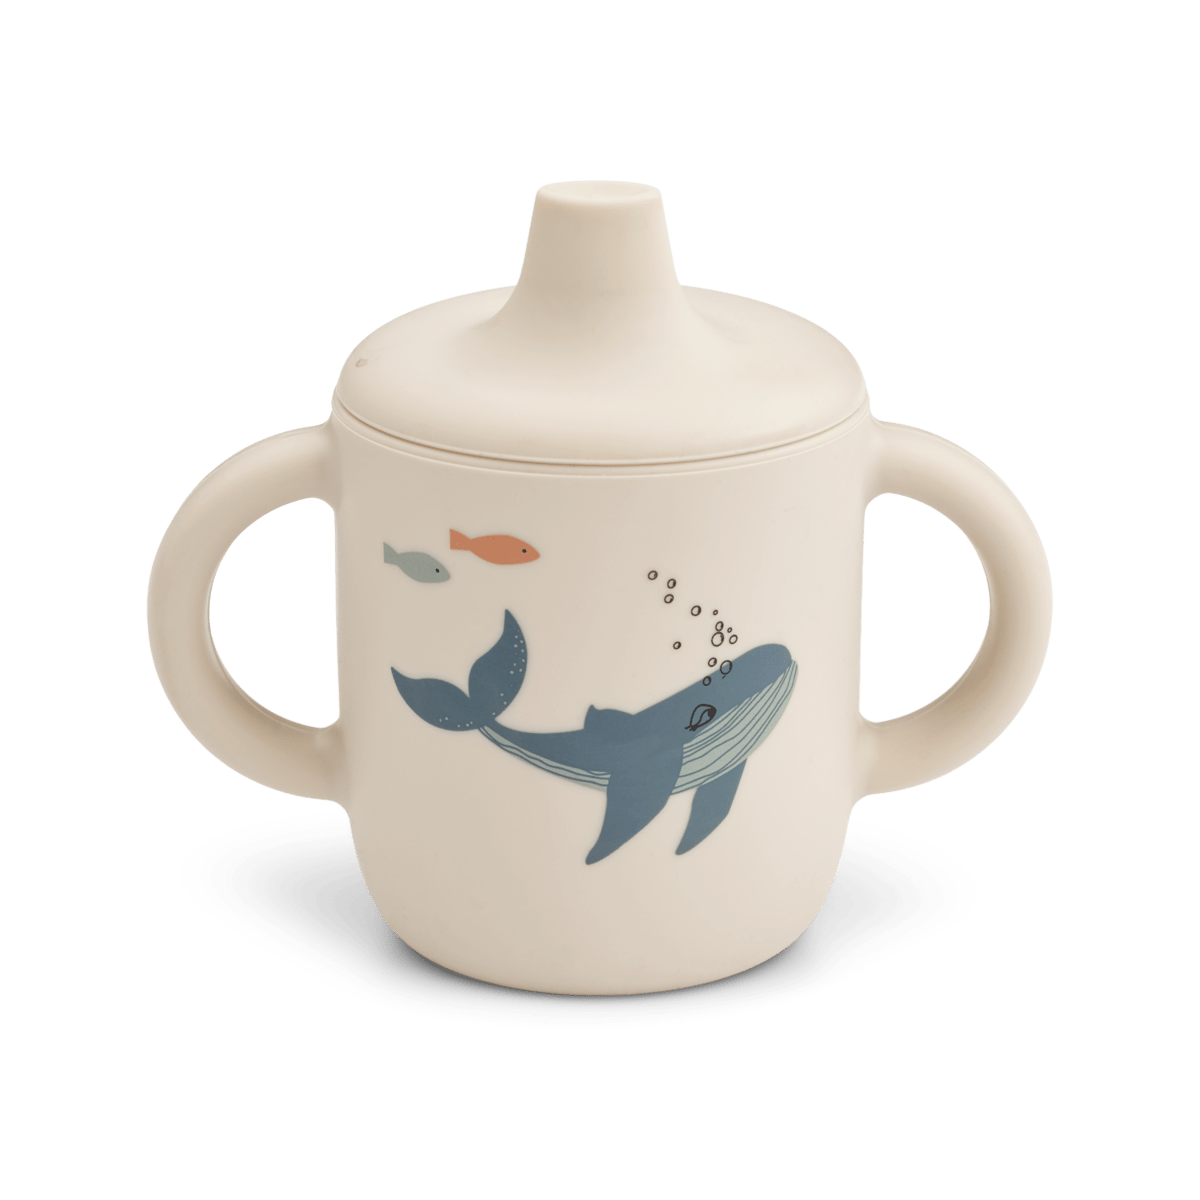 Liewood Sippy Cup Liewood Neil Sippy Cup (Sea Creature/Sandy)